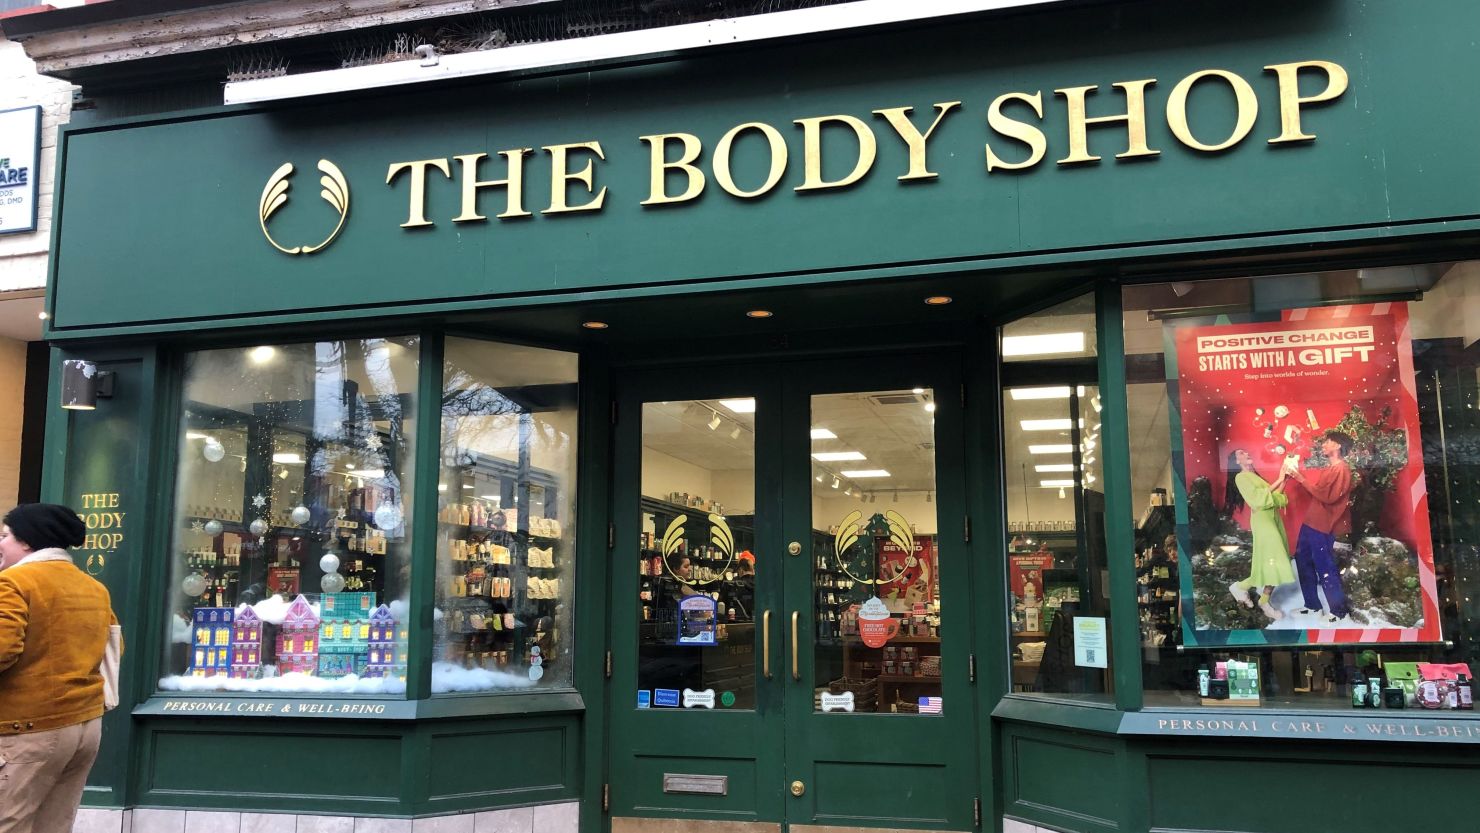 Beauty Giant's US Exit: The Body Shop Shuts Doors, Sparks Talks on Ethical Shopping's Future